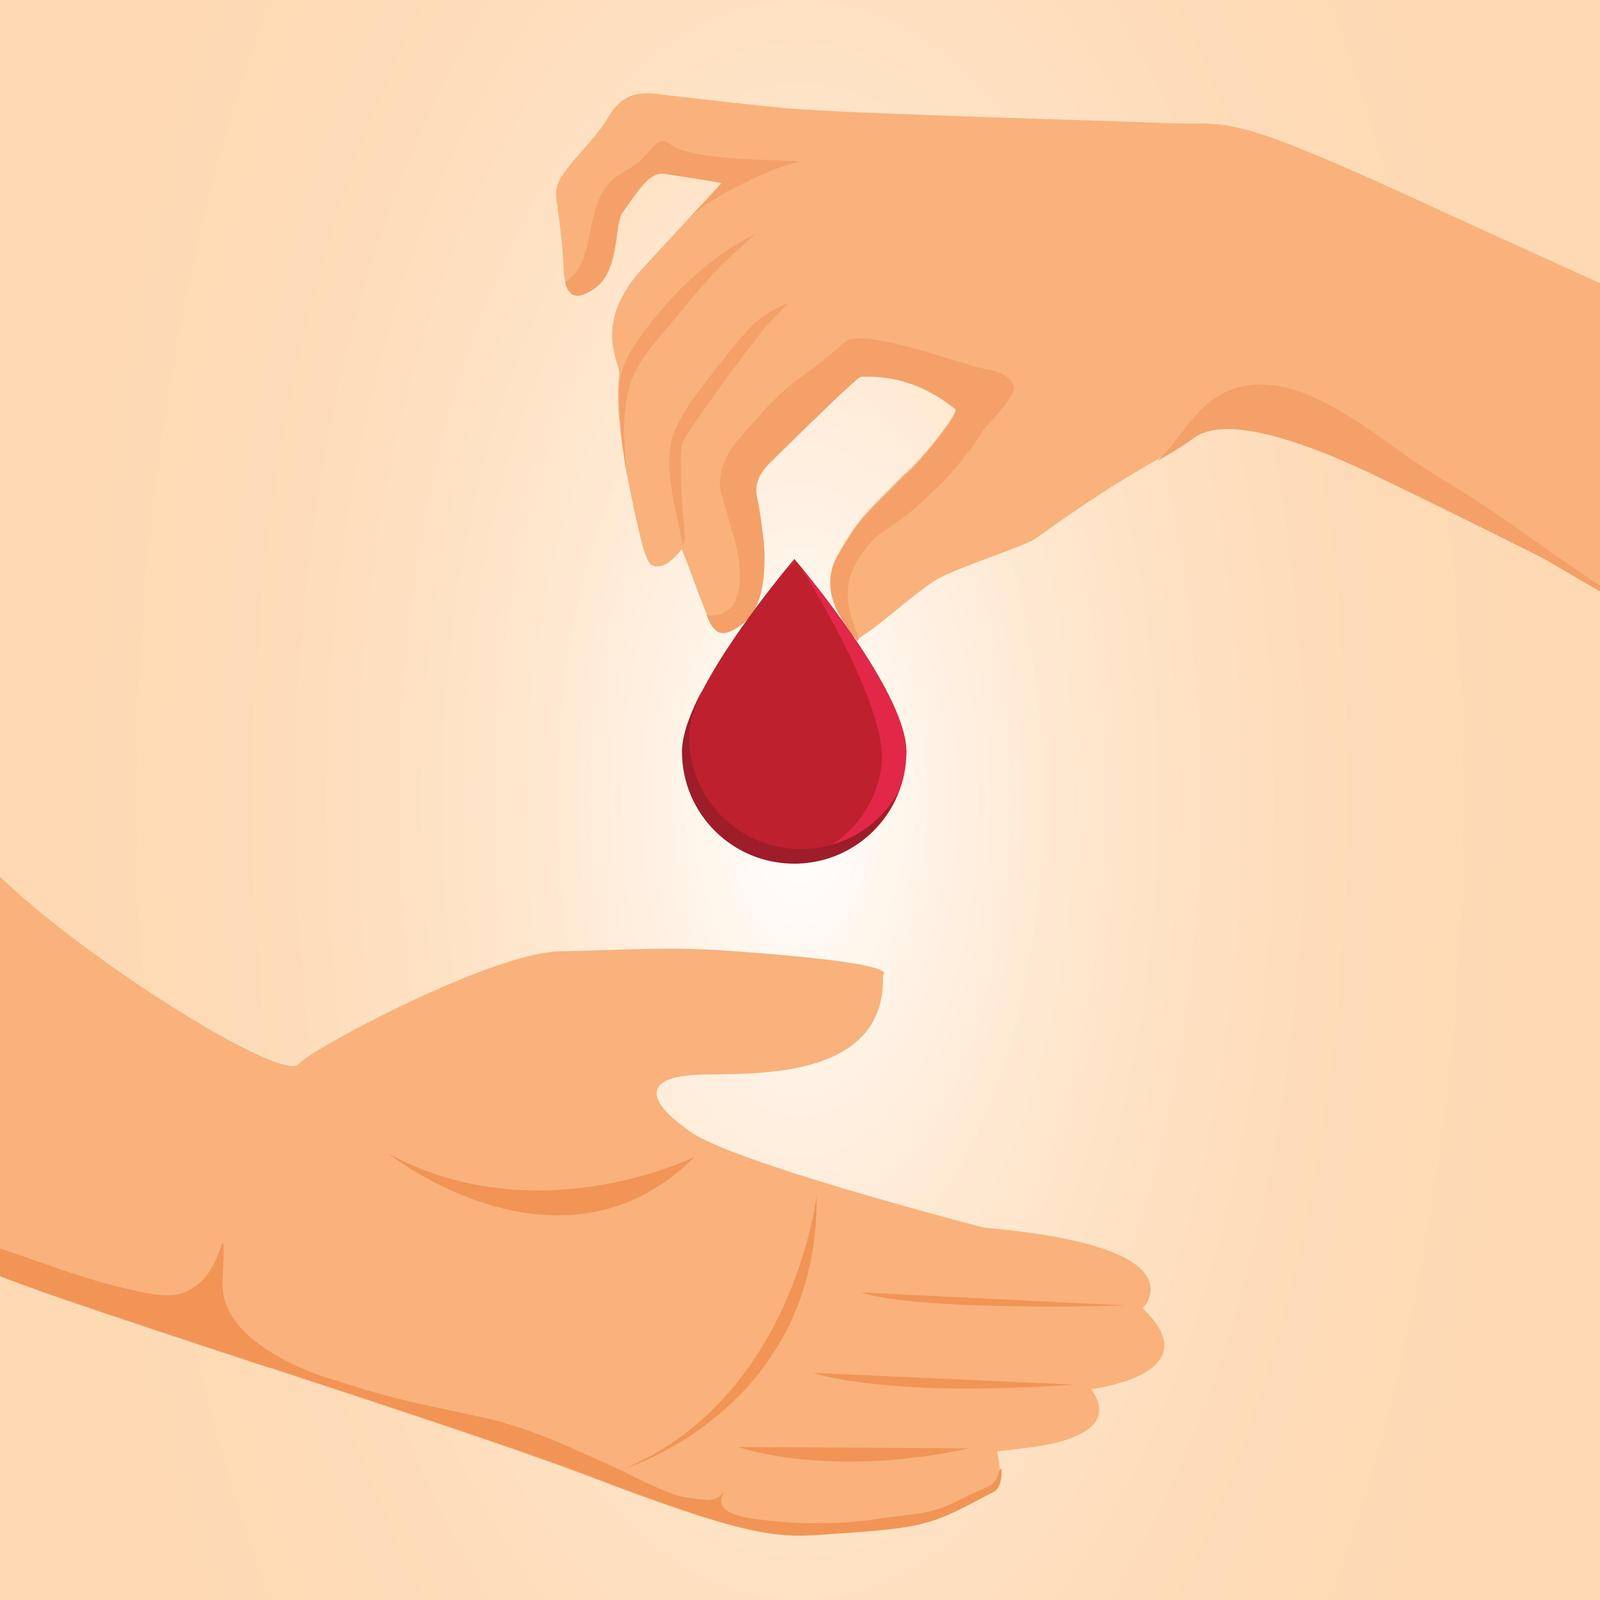 Blood donation concept. Drop of blood hold in hand by eveleen